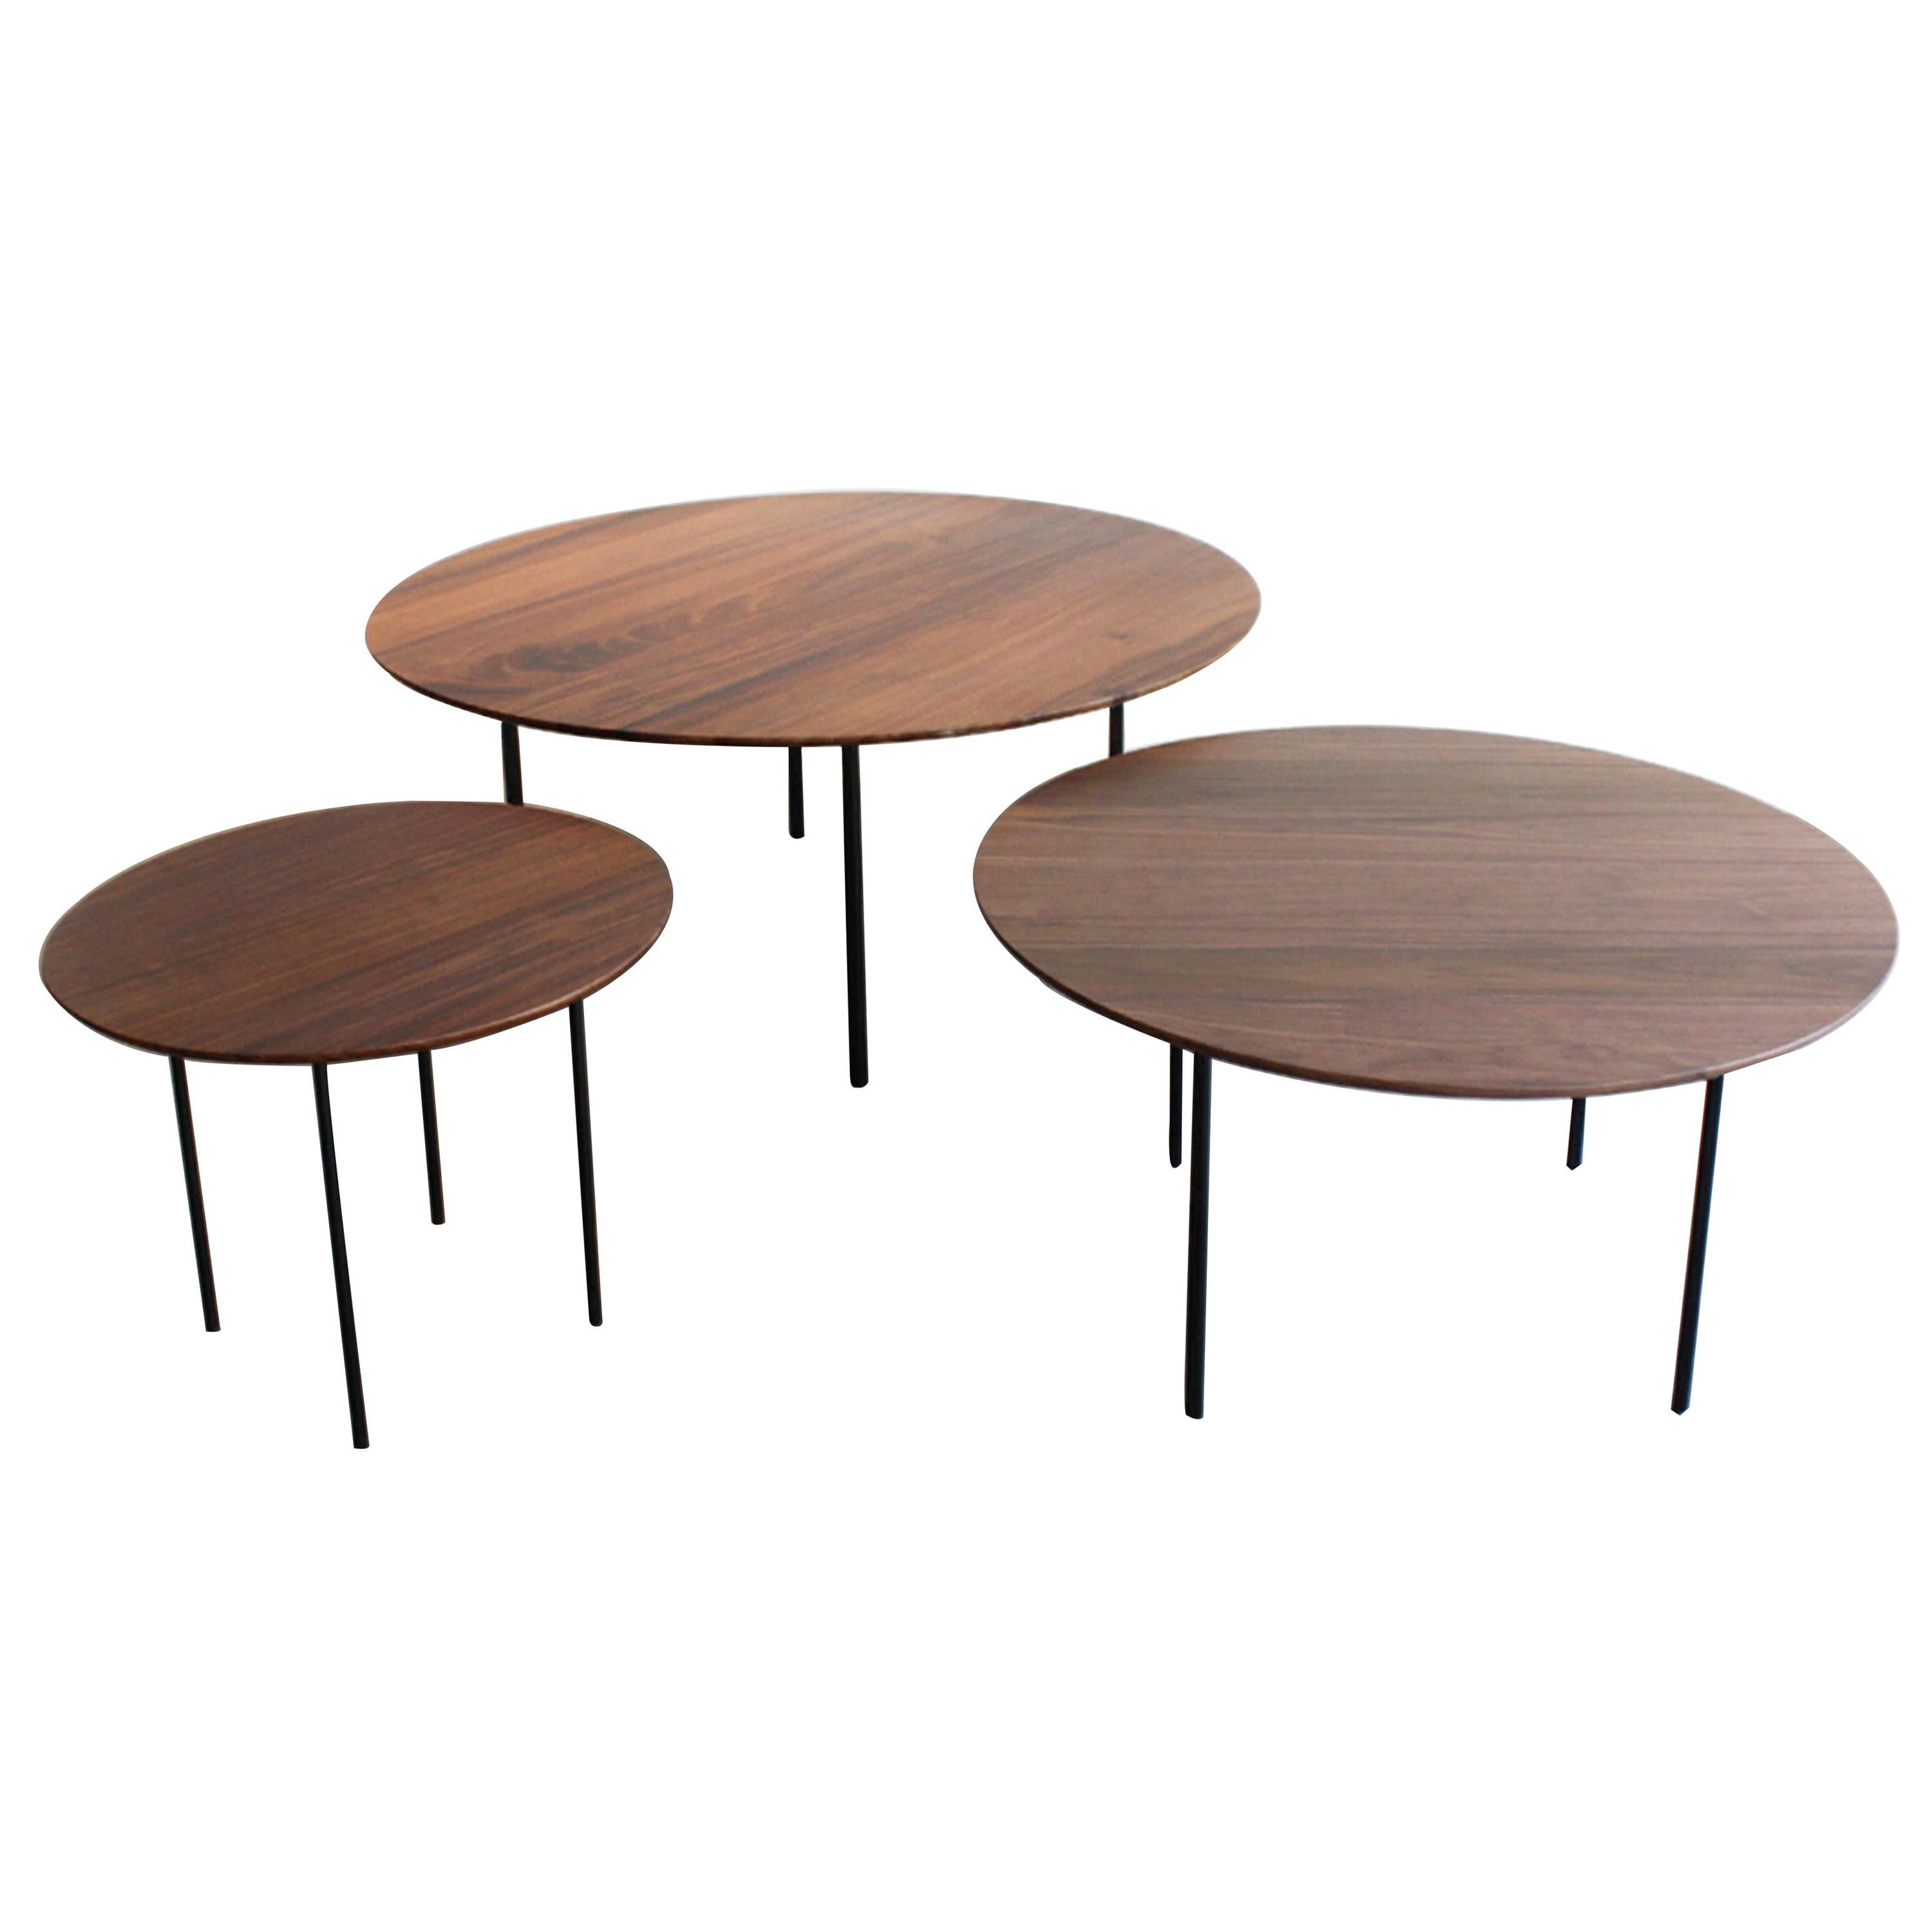 Set of Las Plato Short Tables, Maria Beckmann, Represented by Tuleste Factory For Sale